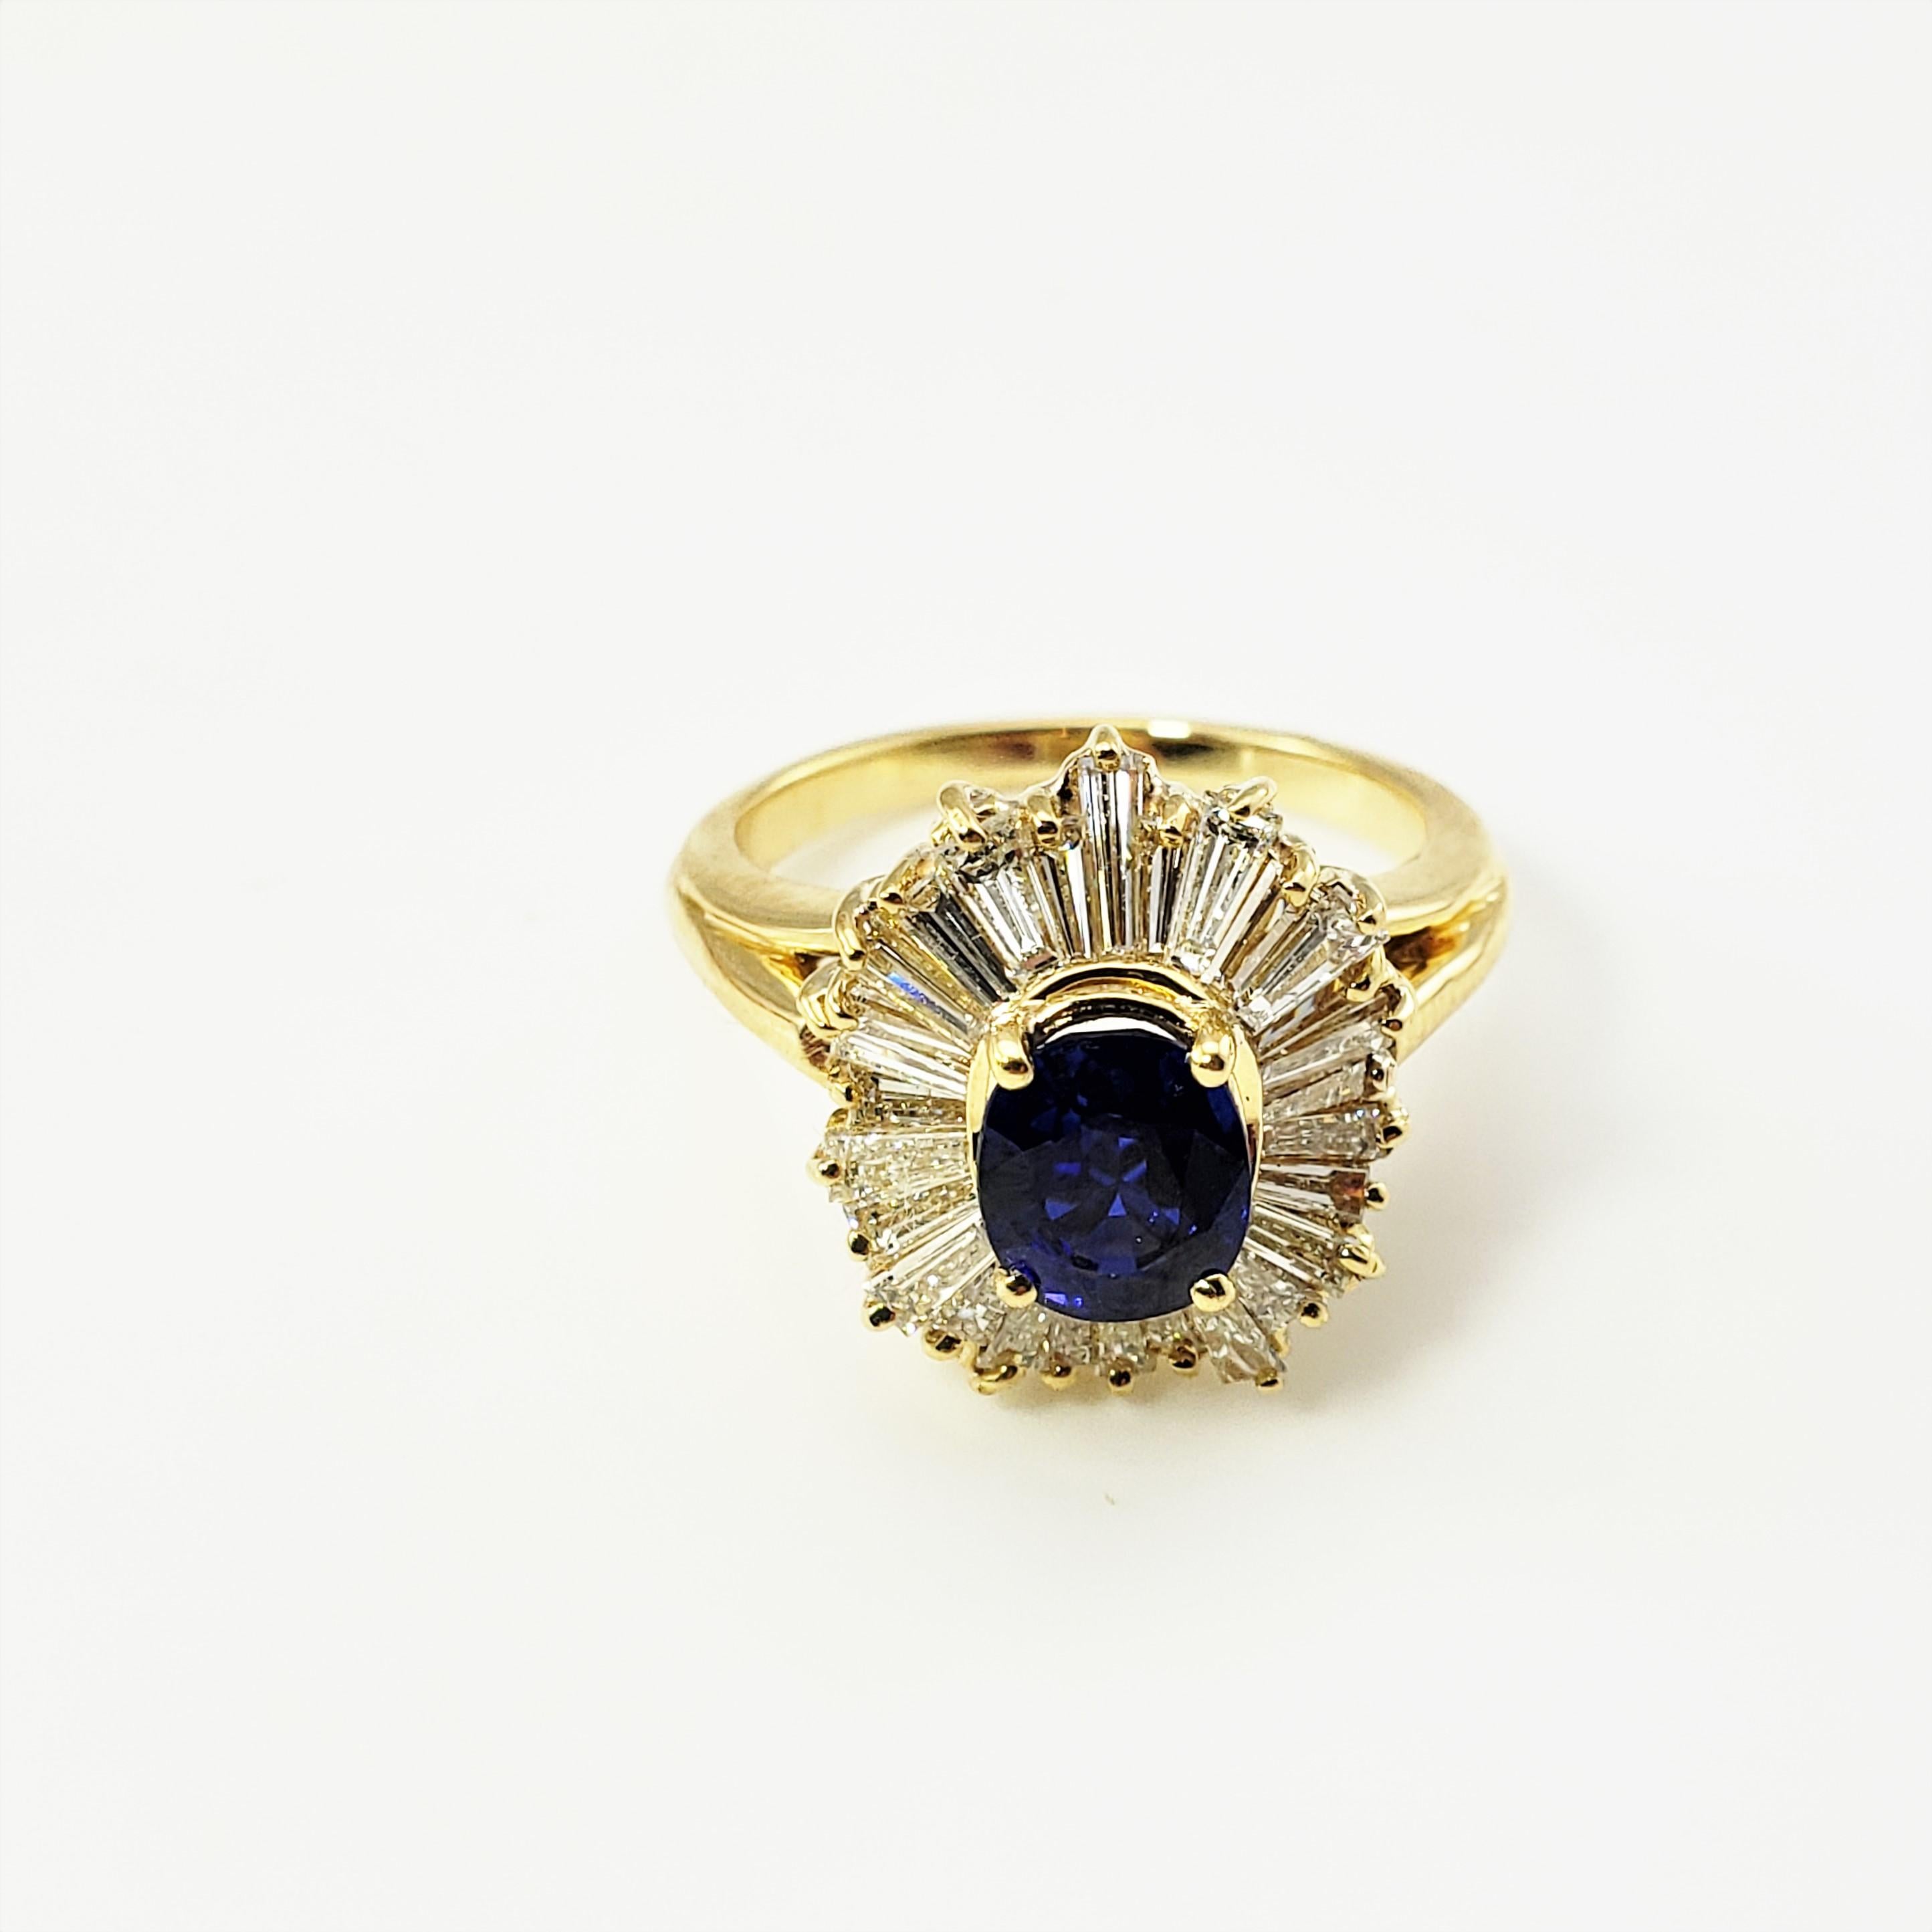 18 Karat Yellow Gold Sapphire and Diamond Ring Size 6 GAI Certified-

This stunning ring features one oval sapphire and 28 baguette diamonds set in classic 18K yellow gold.  Top of ring measures 15 mm x 13 mm.  Shank measures 1.5 mm.

Sapphire